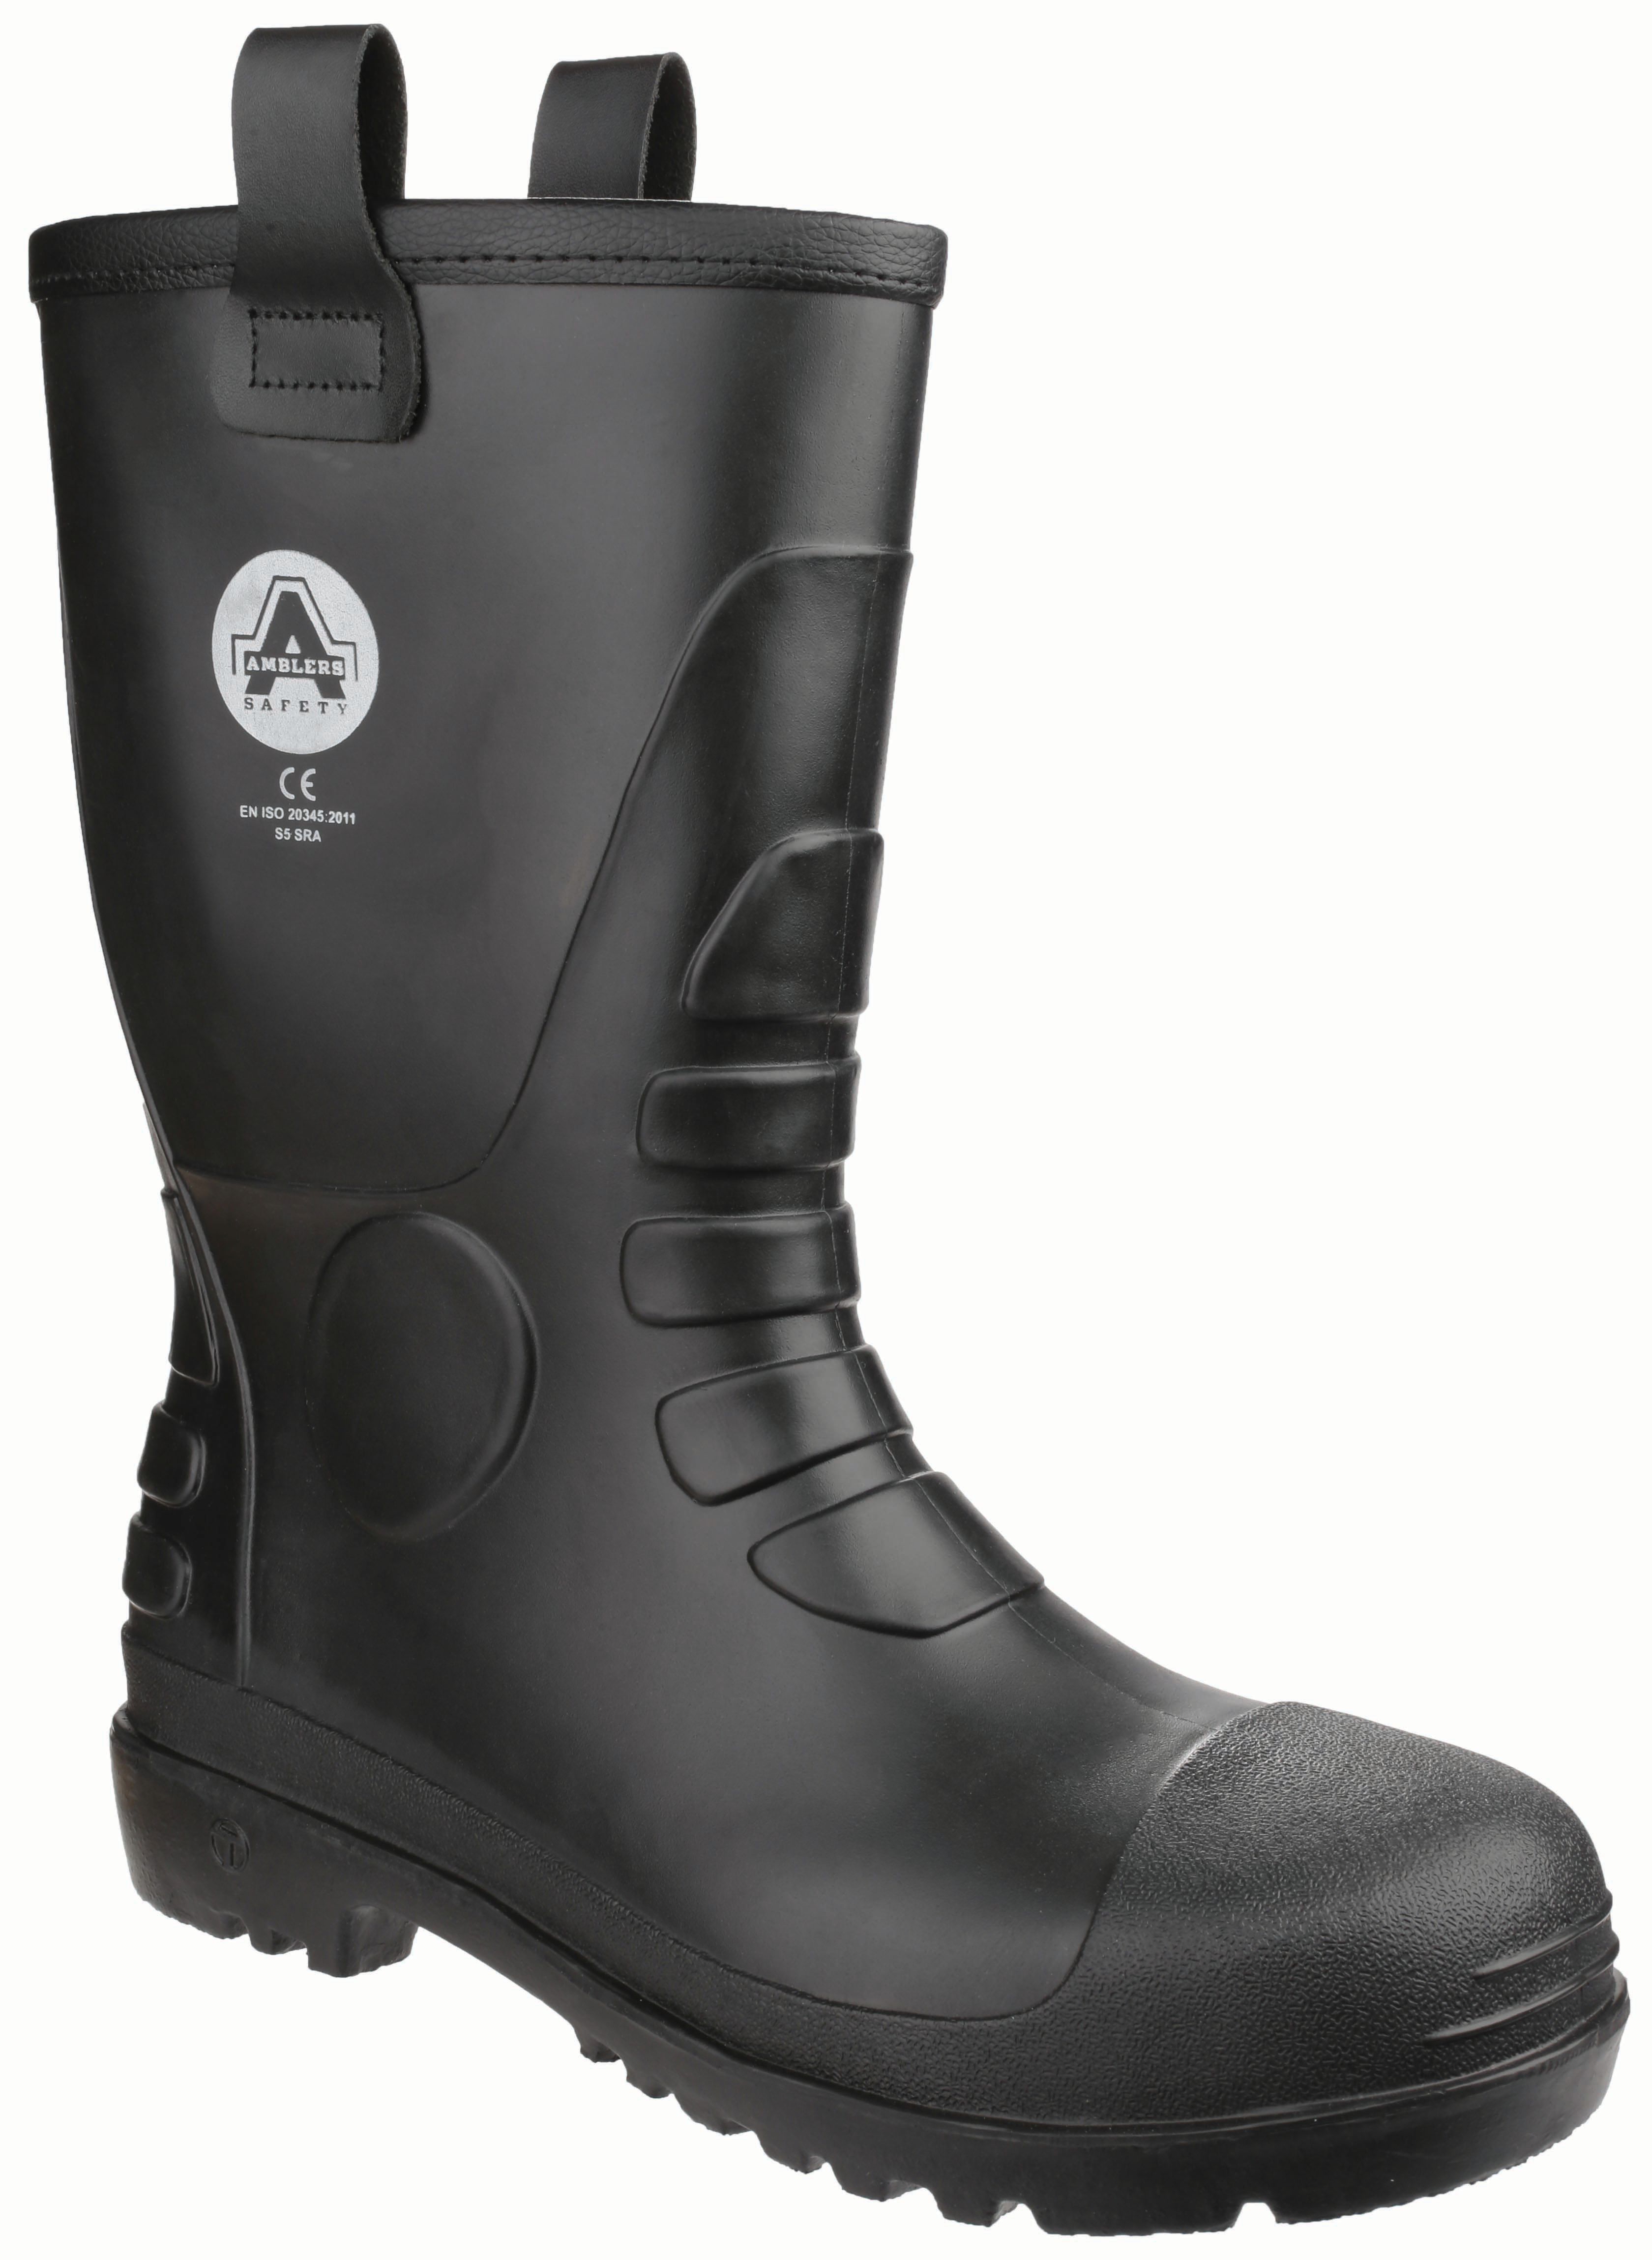 Image of Amblers Safety FS90 Rigger Safety Boot - Black Size 4